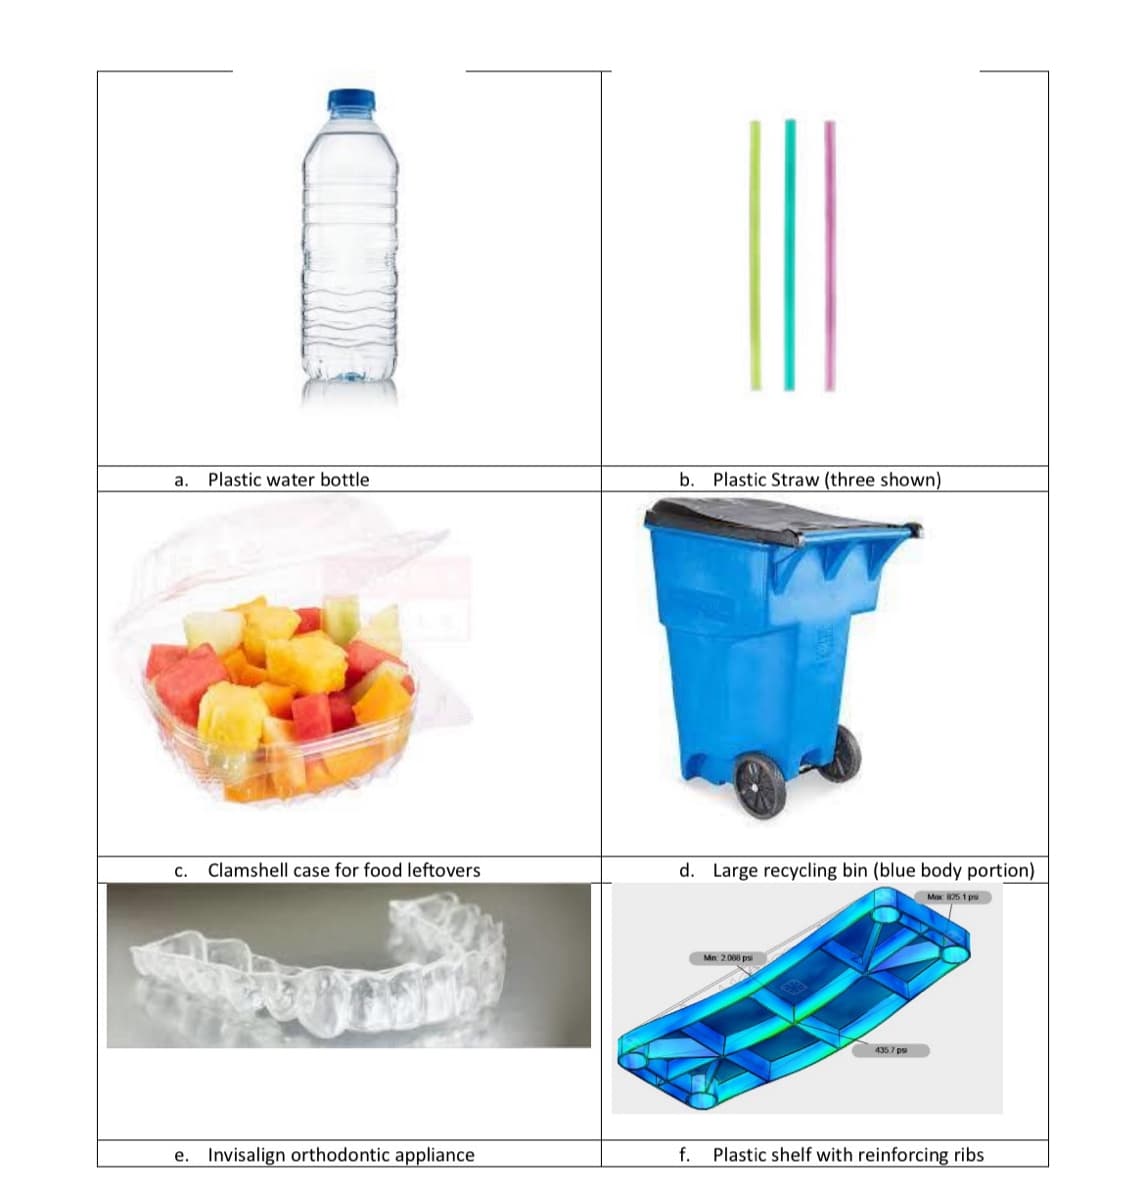 a. Plastic water bottle
b. Plastic Straw (three shown)
C. Clamshell case for food leftovers
d. Large recycling bin (blue body portion)
Max 825.1 psi
Mn: 2.068 psi
435.7 psi
e. Invisalign orthodontic appliance
f. Plastic shelf with reinforcing ribs